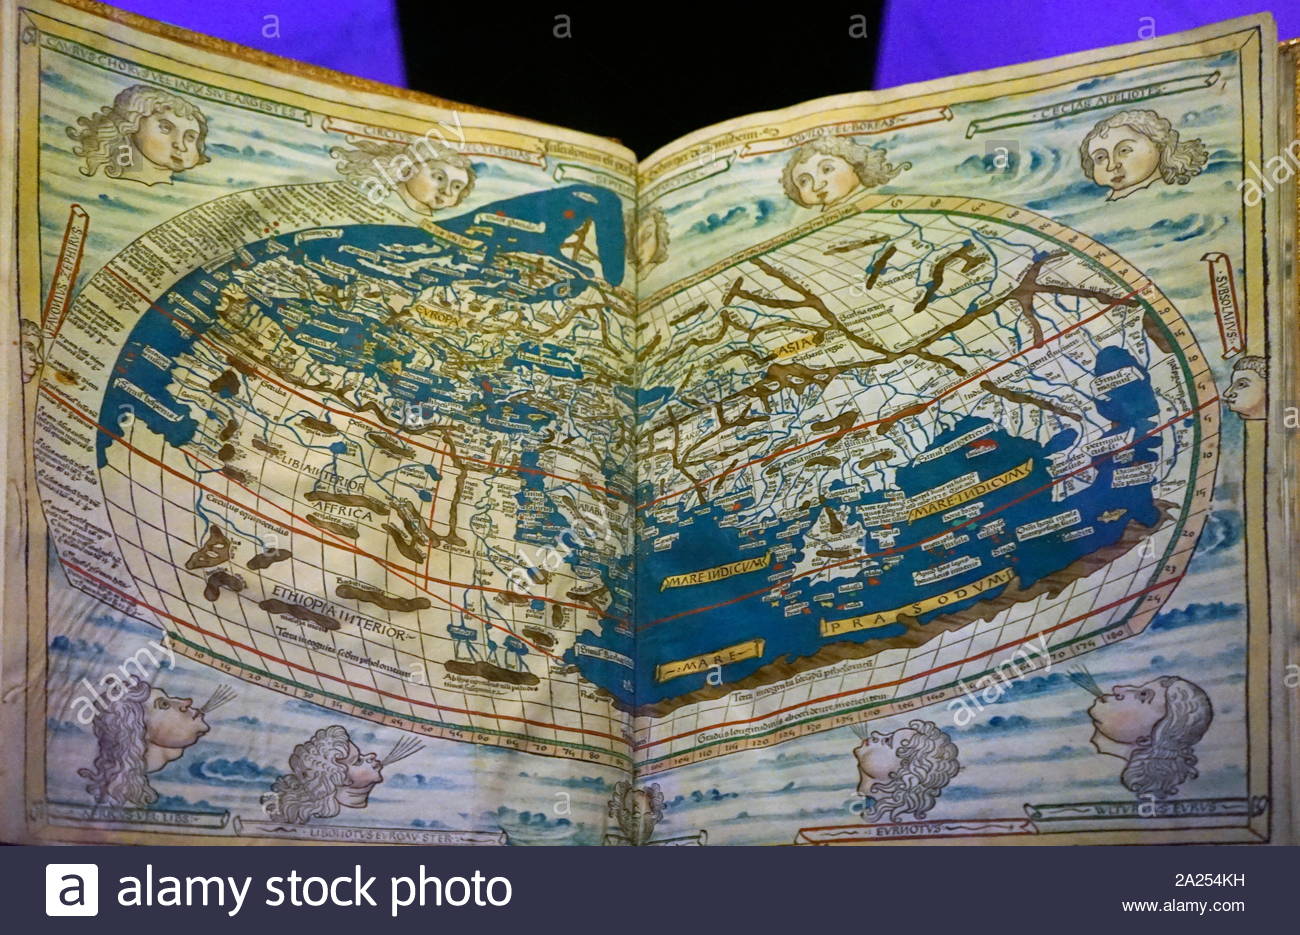 The Ptolemy world map is a map of the world known to Hellenistic society in the 2nd century. It is based on the description contained in Ptolemy's book Geography, written c. 150. Based on an inscription in several of the earliest surviving manuscripts, it is traditionally credited to Agathodaemon of Alexandria. Stock Photo